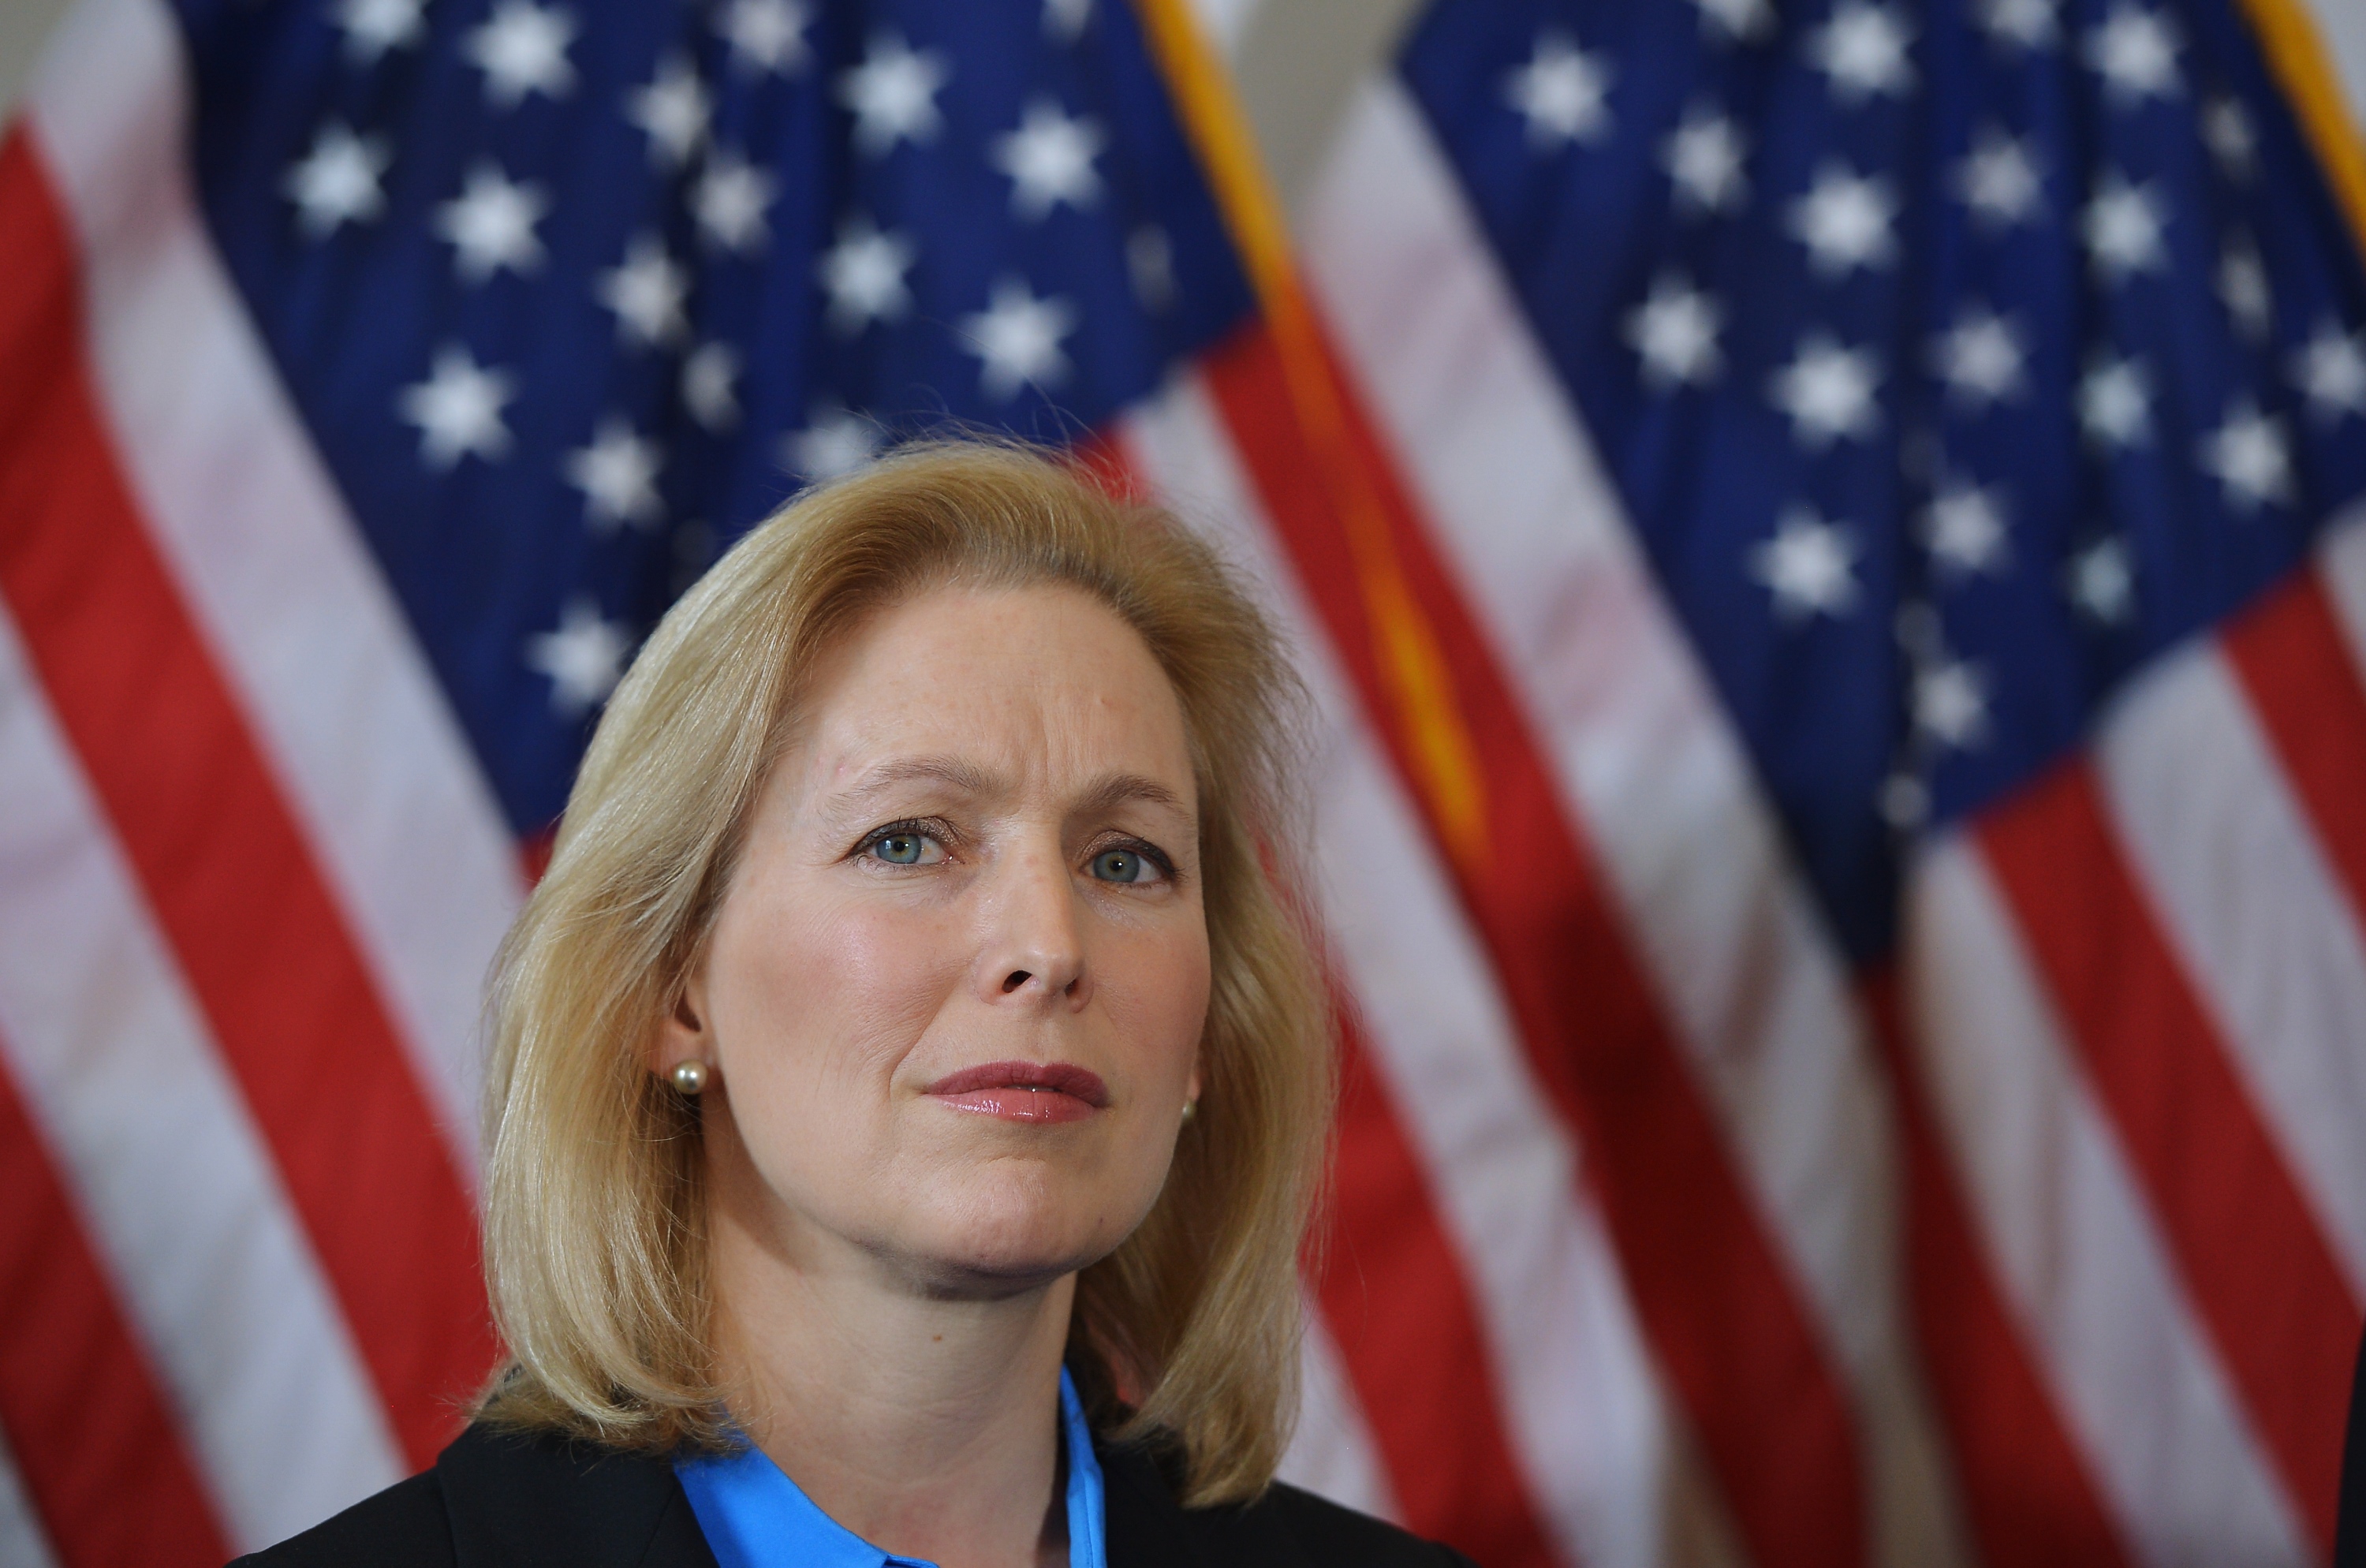 Senator Kirsten Gillibrand, D-NY attends a press conference calling for the creation of an independent military justice system to deal with sexual harassment and assault in the military, in the Russell Senate Office Building on Capitol Hill in Washington, DC on Feb. 6, 2014. 